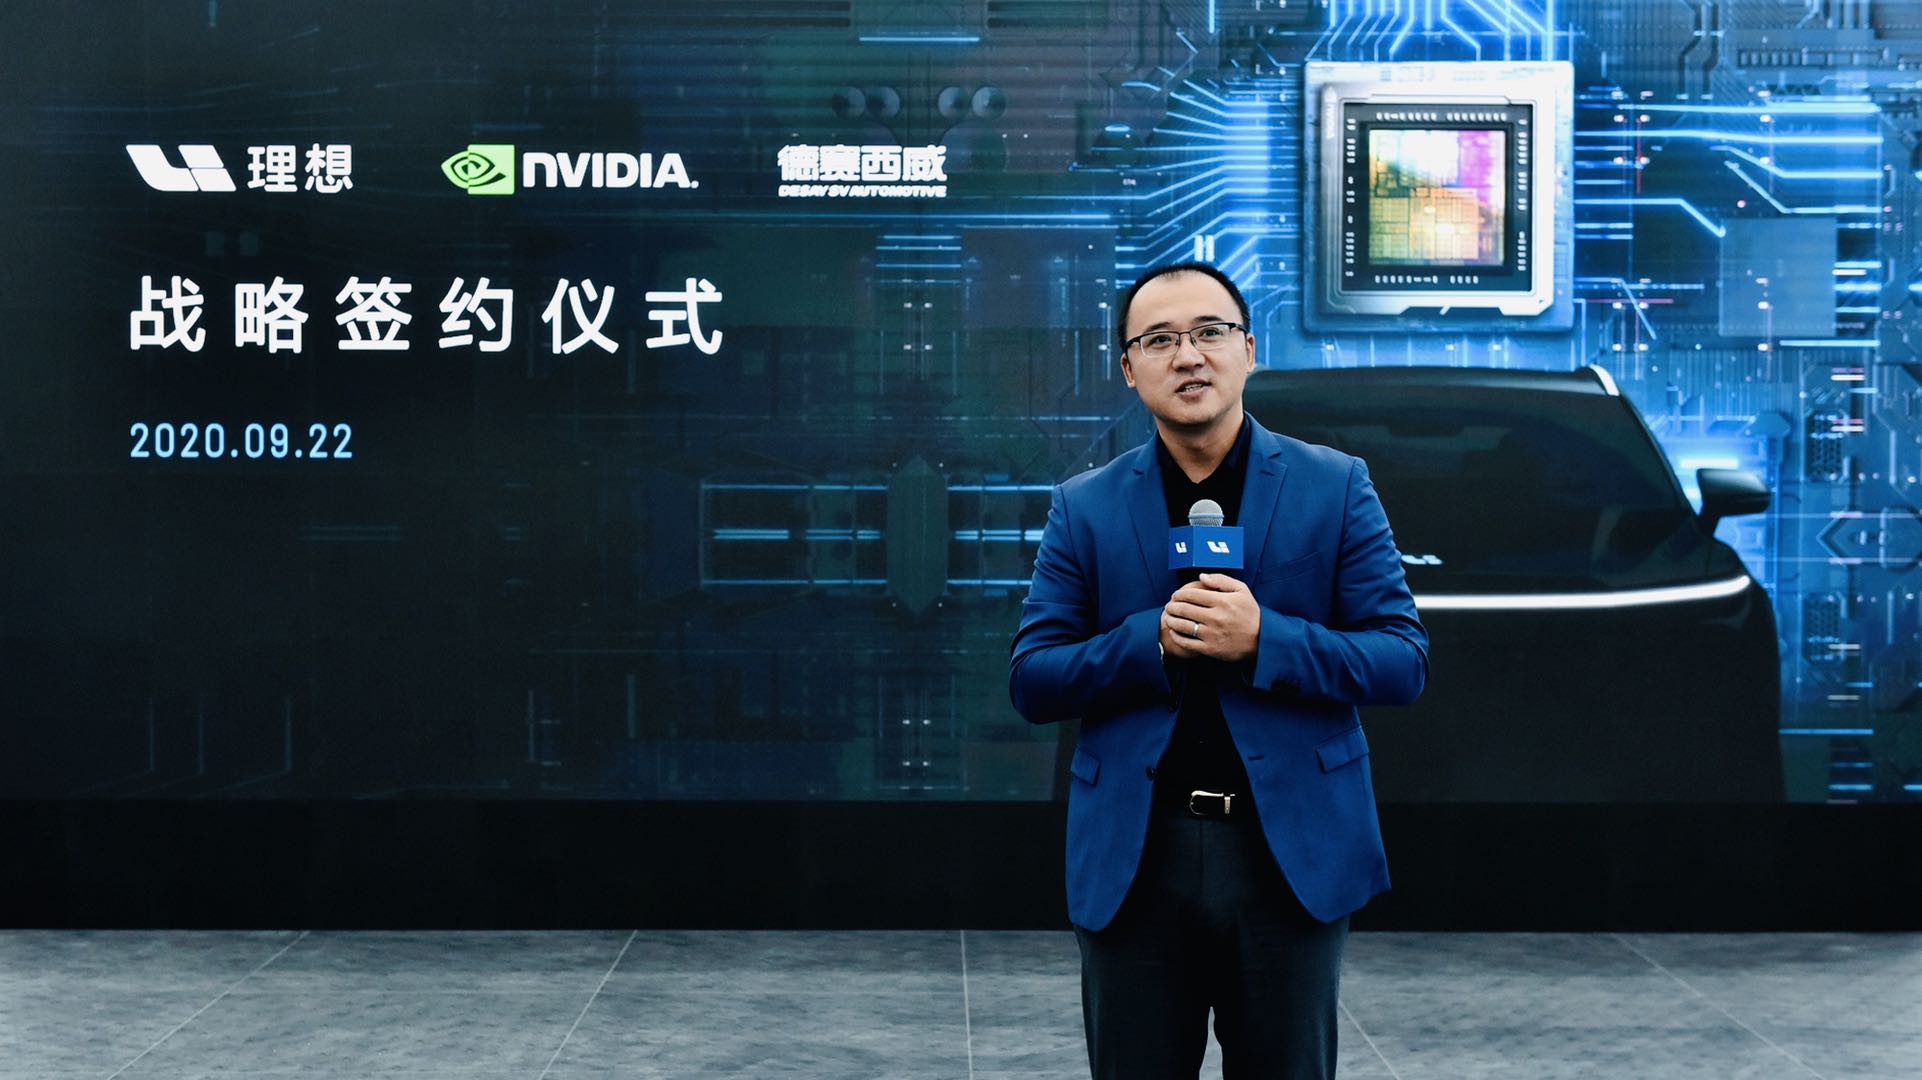 New vehicles will use Orin chips. Ideal collaborates with Desay SV and NVIDIA on strategic partnership.